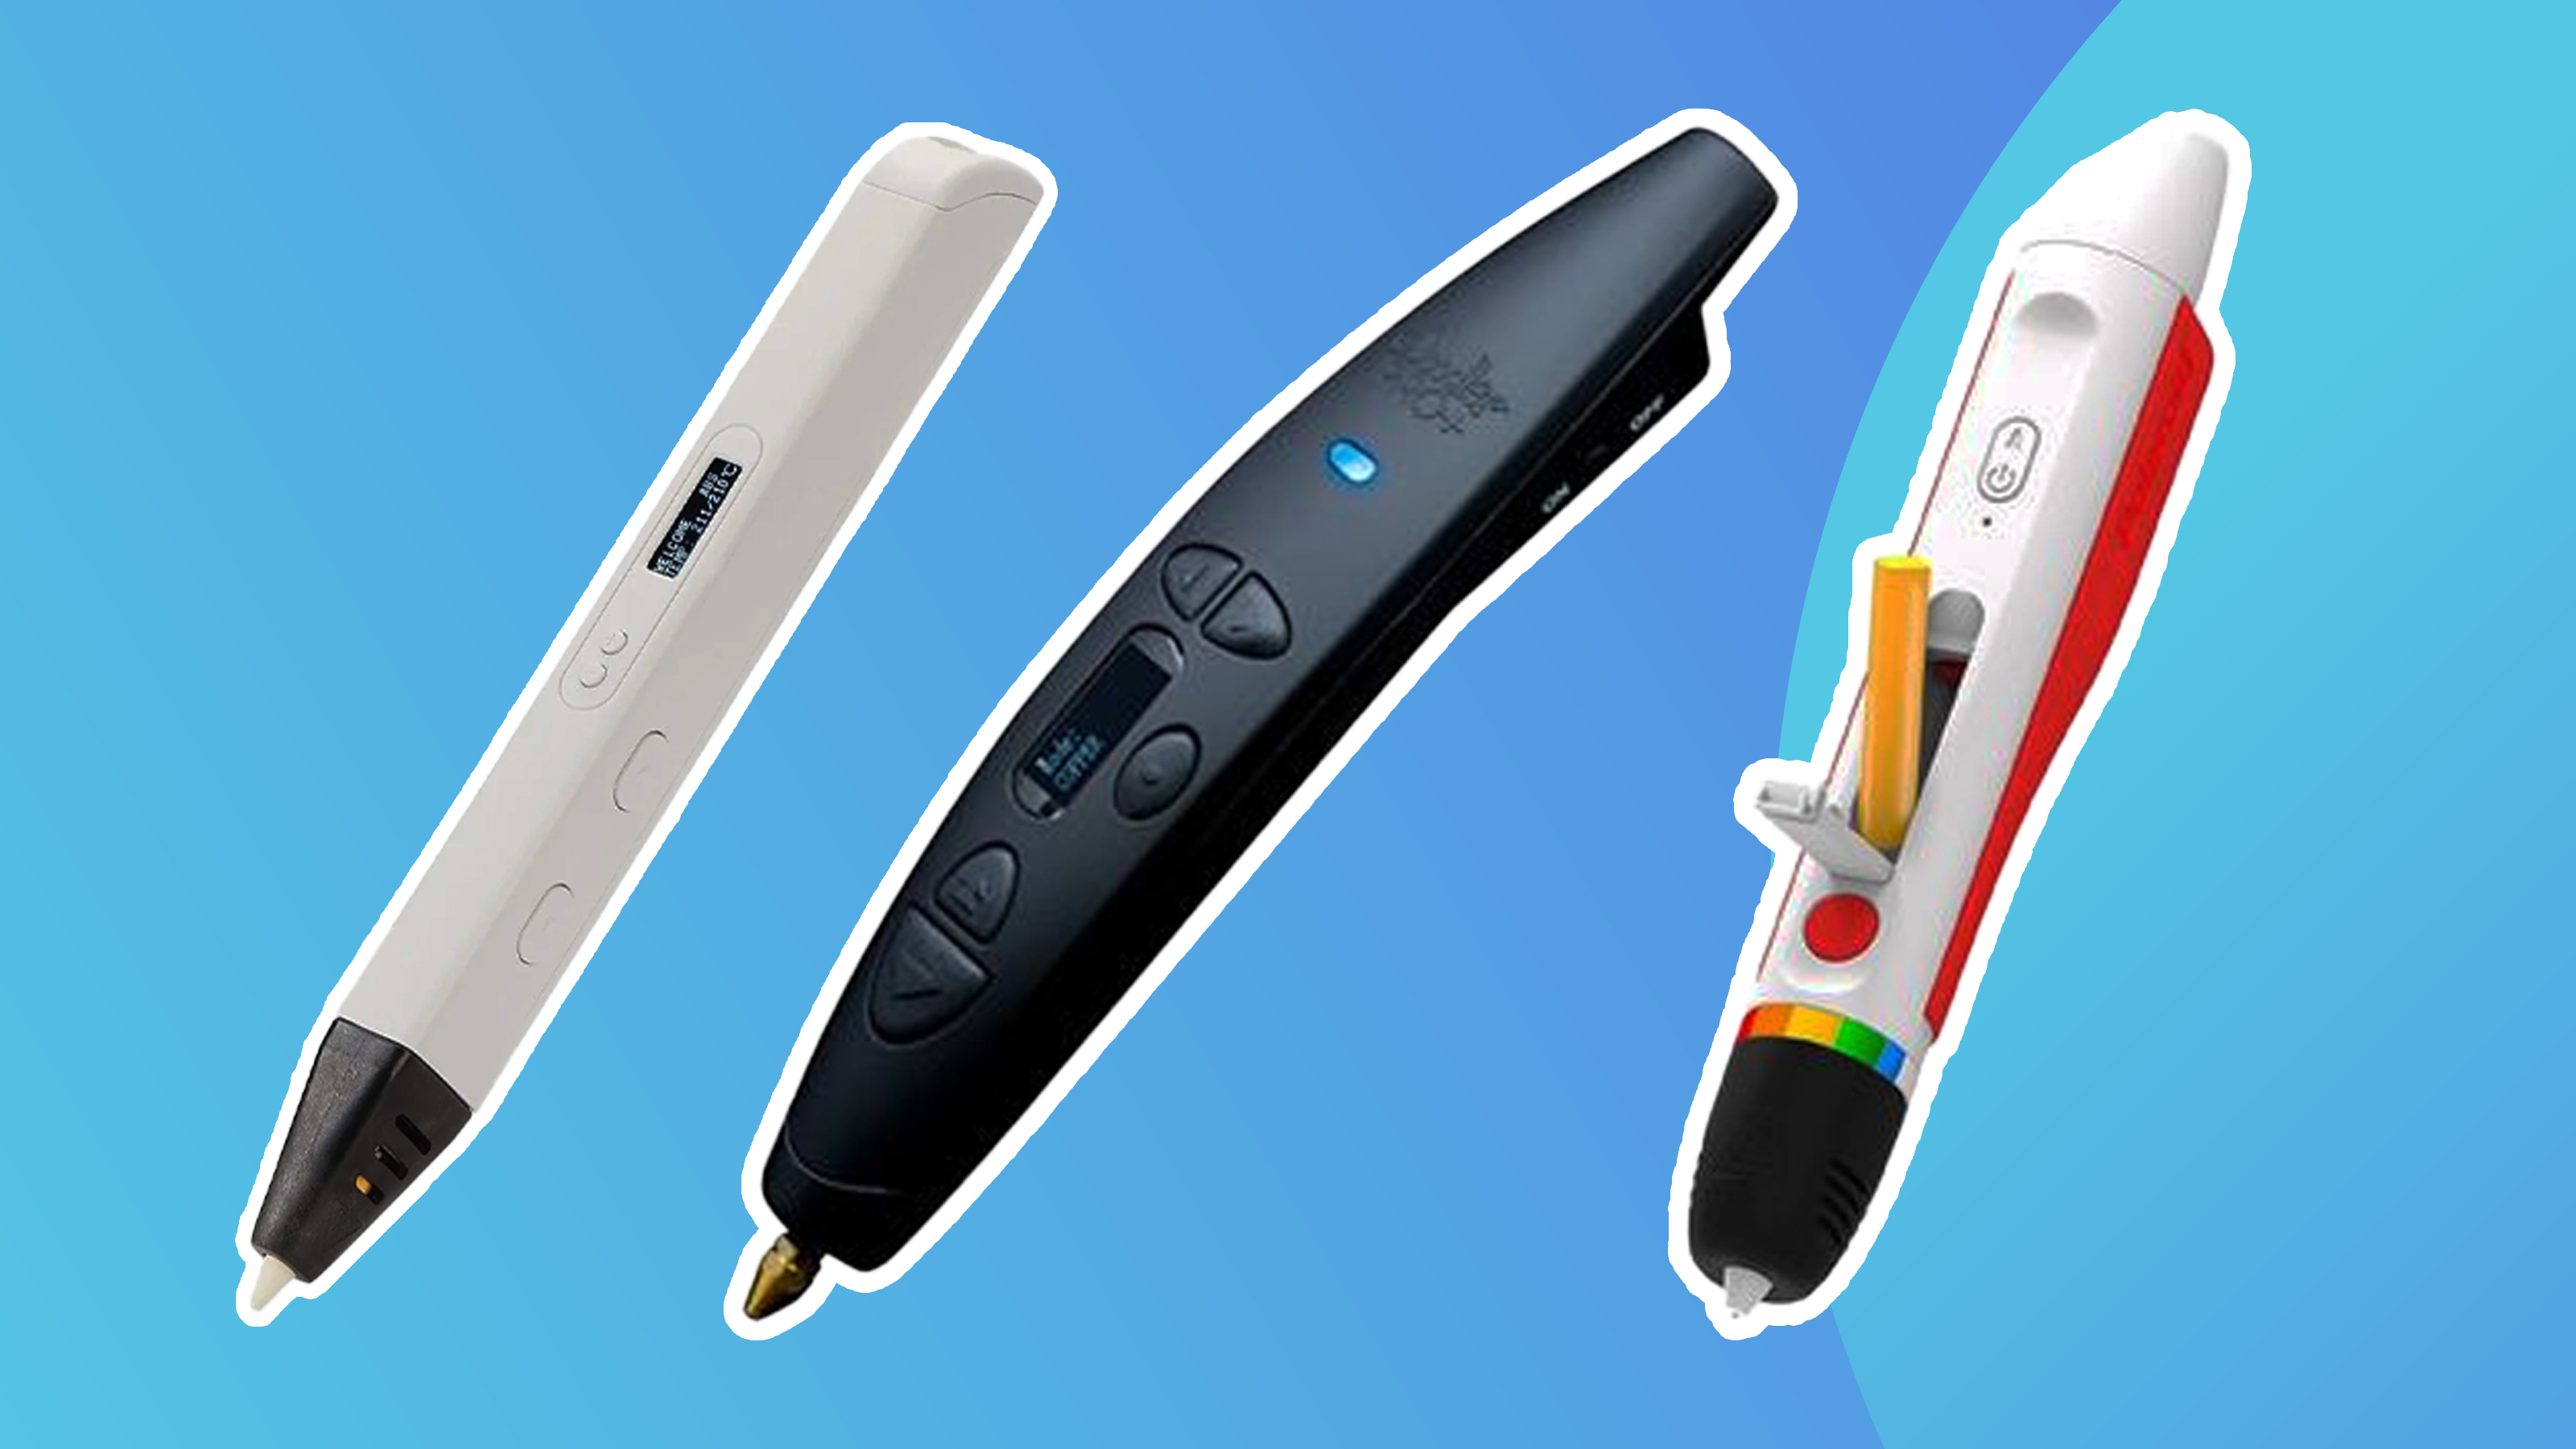 The best 3D pens; three 3D pens, two white and one black